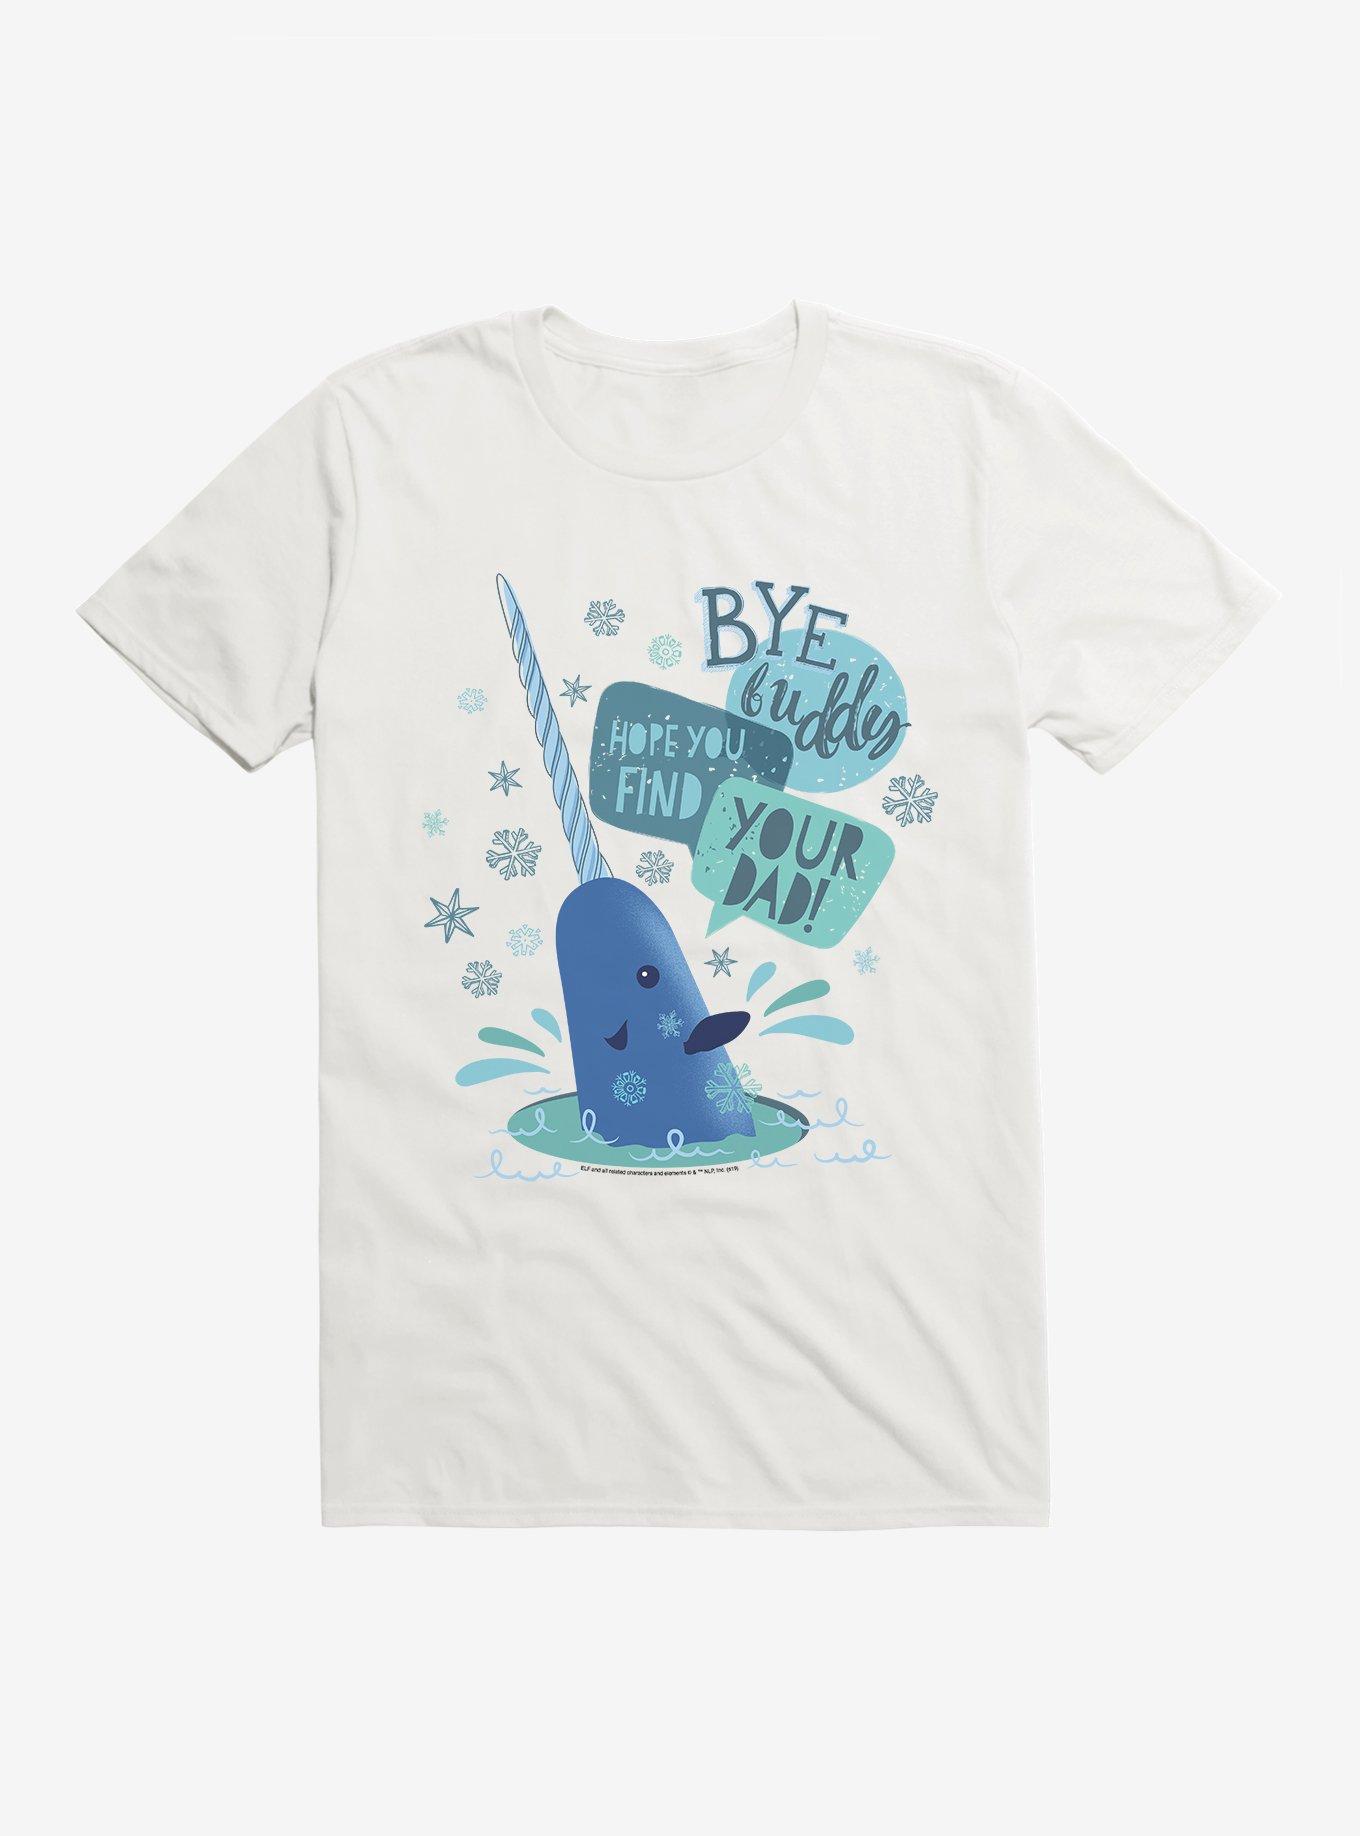 Elf Mr. Narwhal Farewell T-Shirt, , hi-res